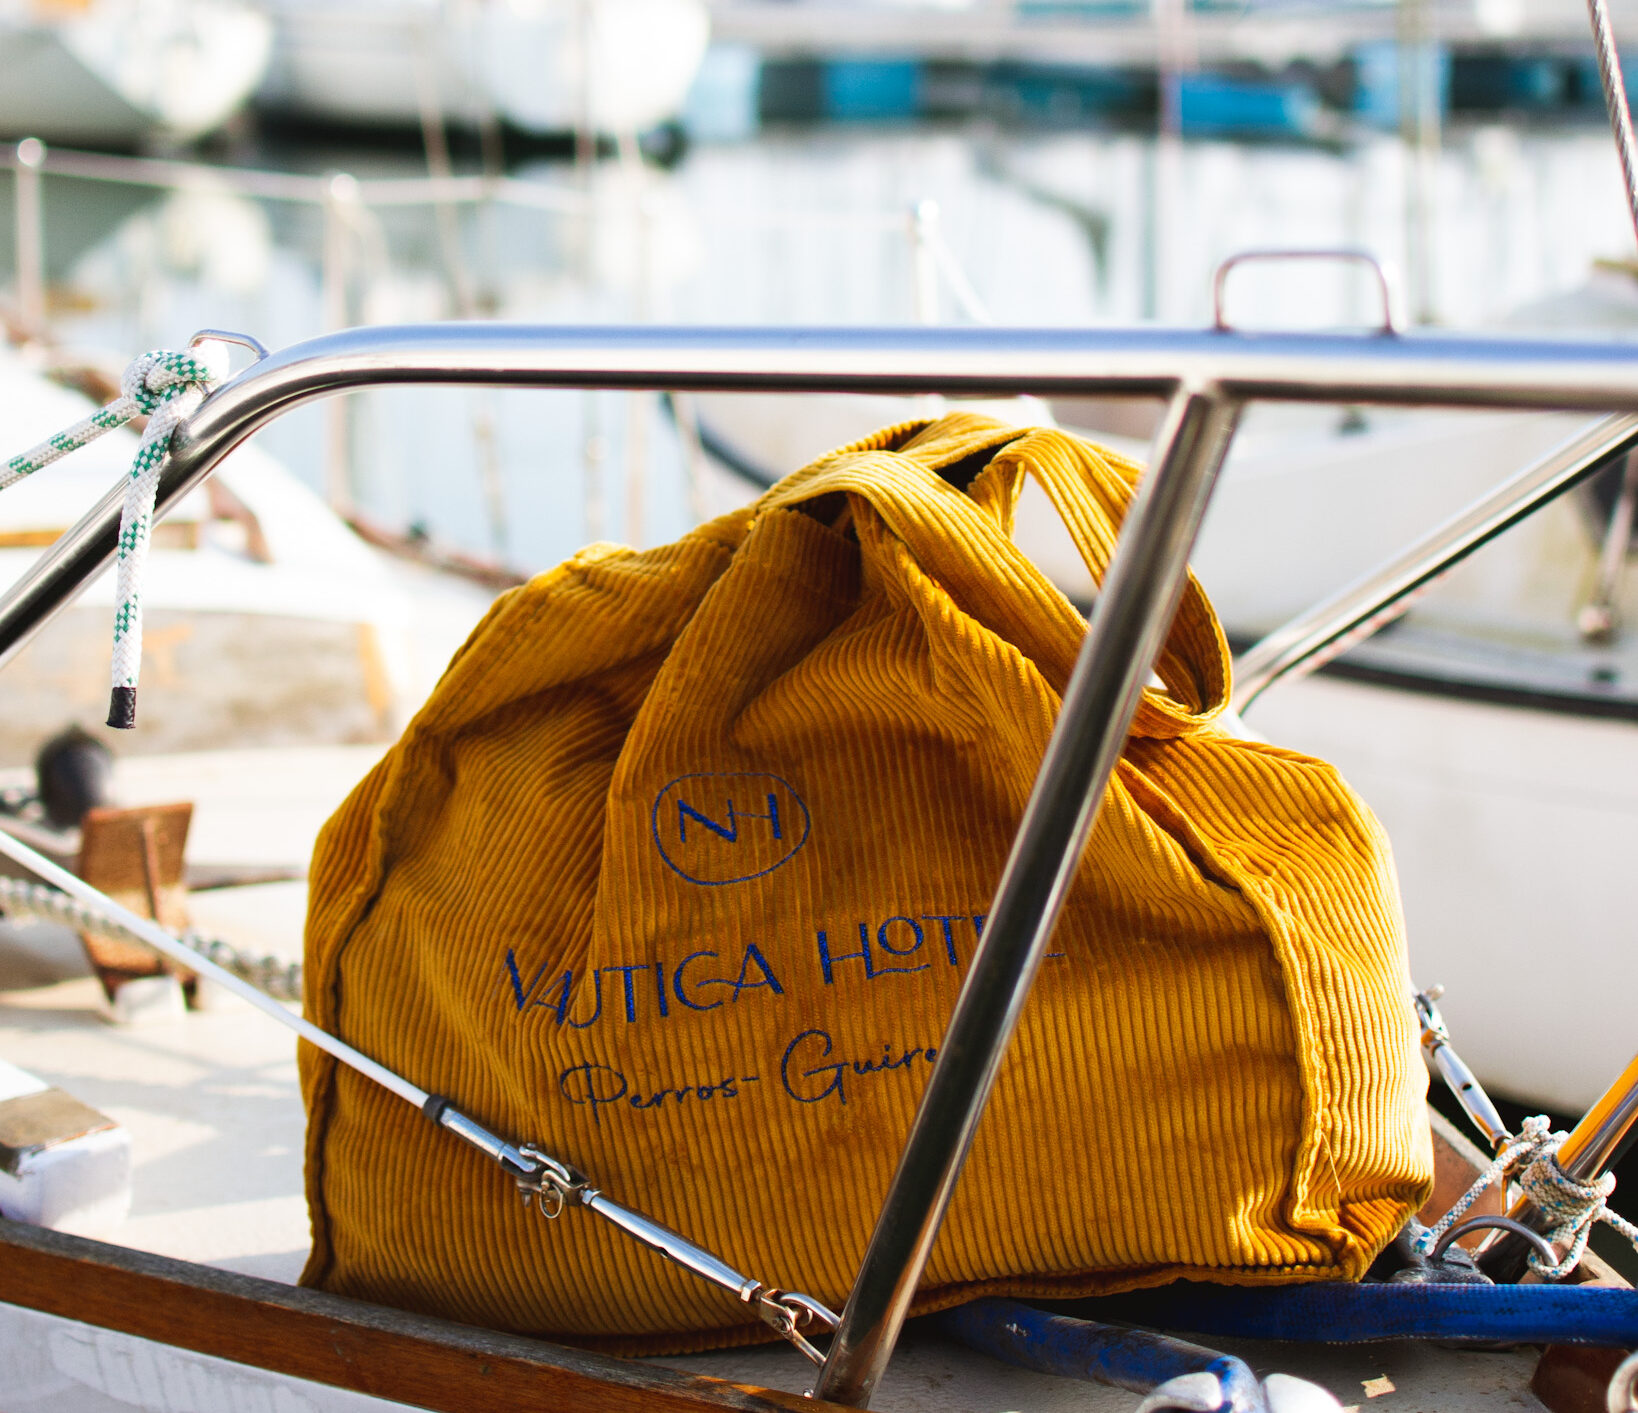 The yellow shopping bag of the Nautica Hotel on a boat in the port of Perros-Guirec